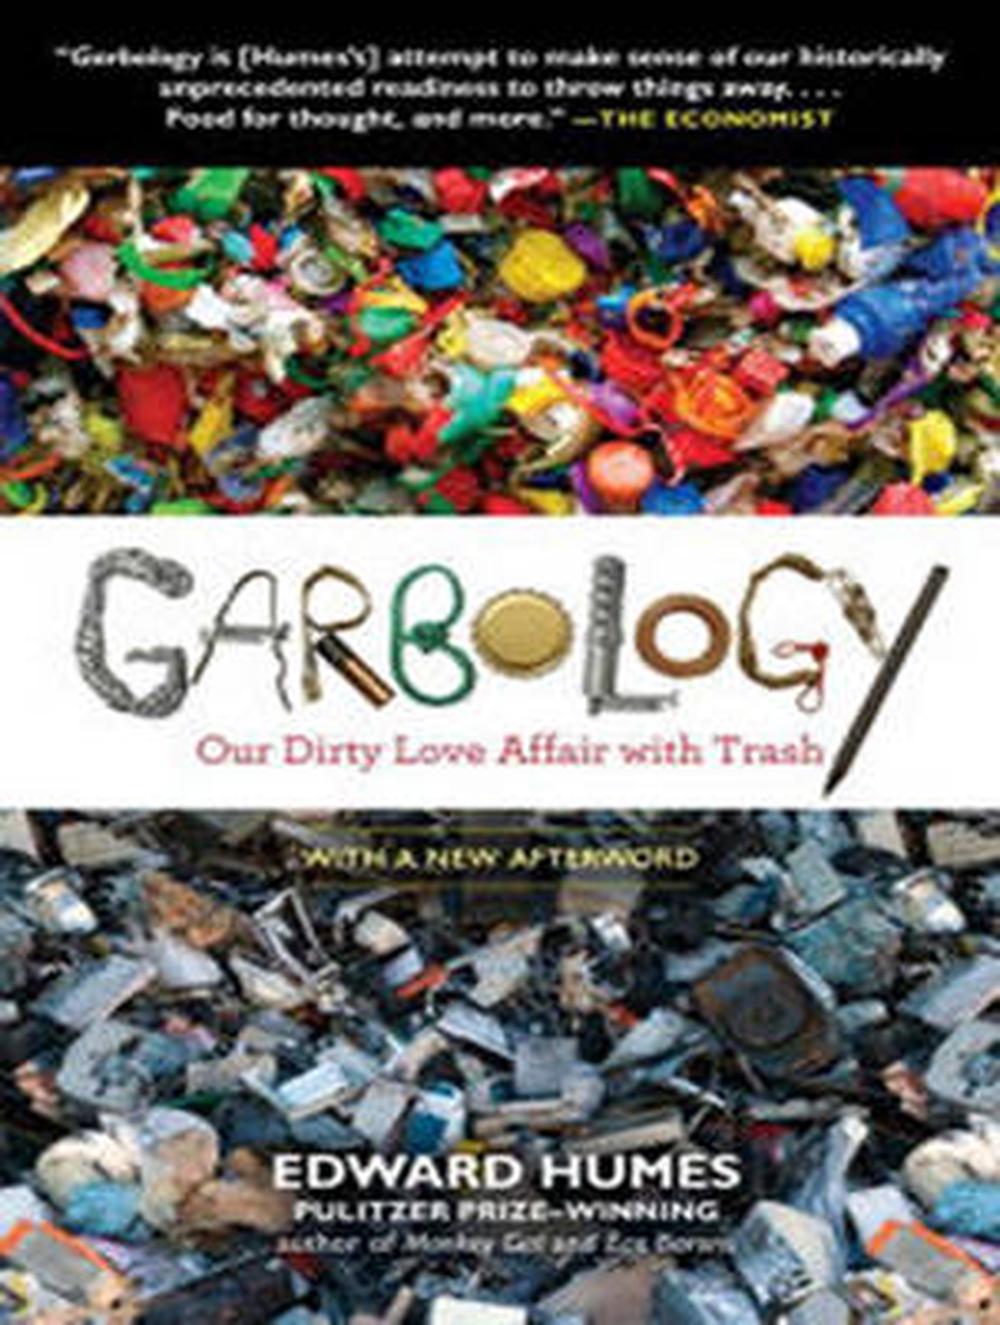 Garbology Our Dirty Love Affair with Trash by Edward Humes (English